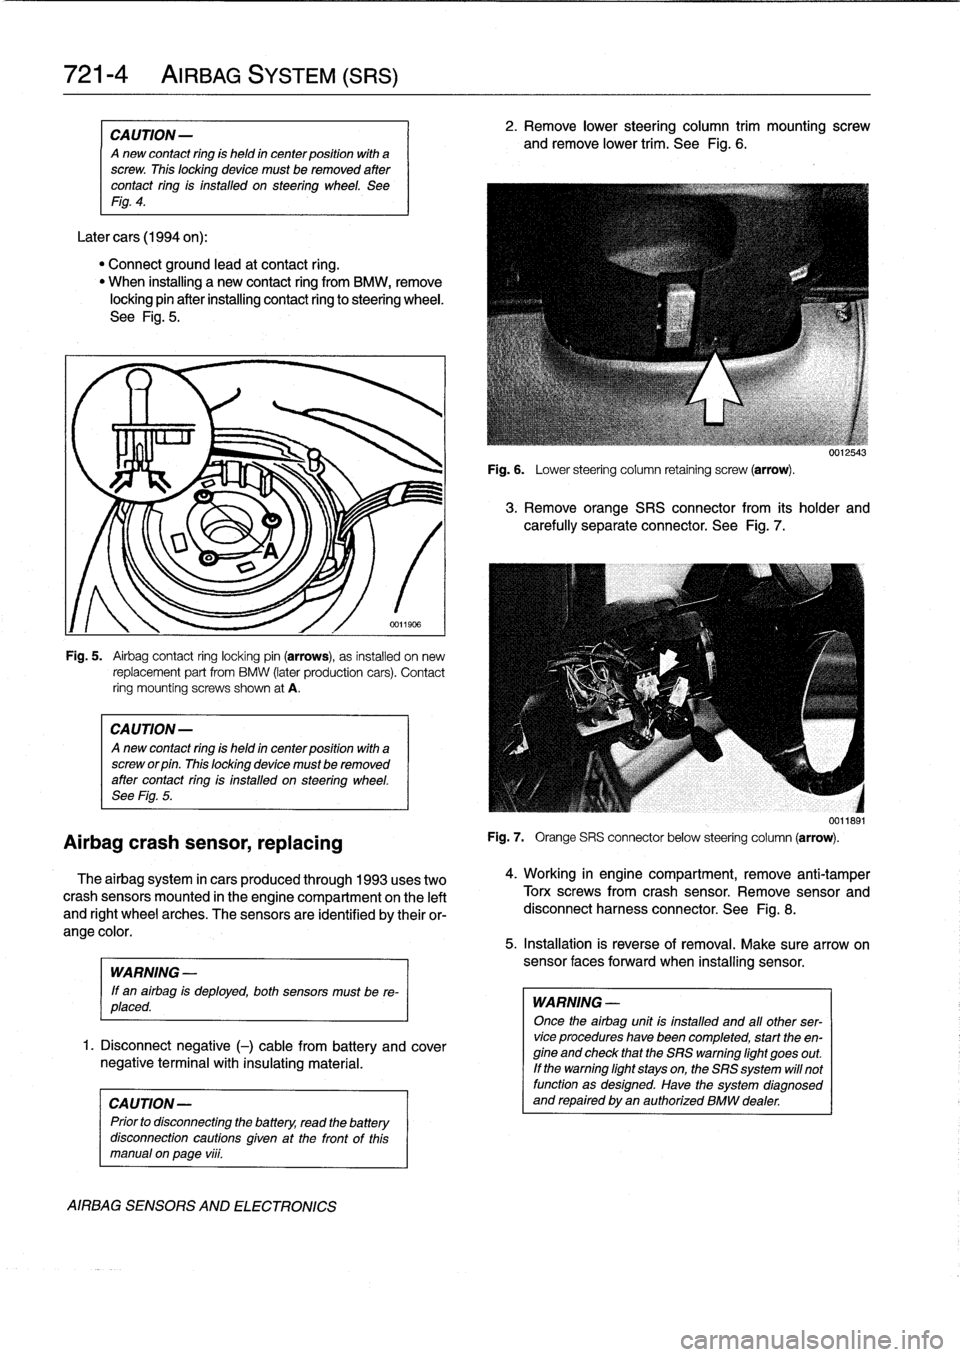 BMW 318i 1996 E36 Owners Manual 
721-
4

	

AIRBAG
SYSTEM
(SRS)

CAUTION-

A
new
contact
ring
is
held
in
center
position
with
a
screw
.
This
locking
device
must
be
removed
after
contact
ring
is
installed
on
steering
wheel
.
See
Fig
